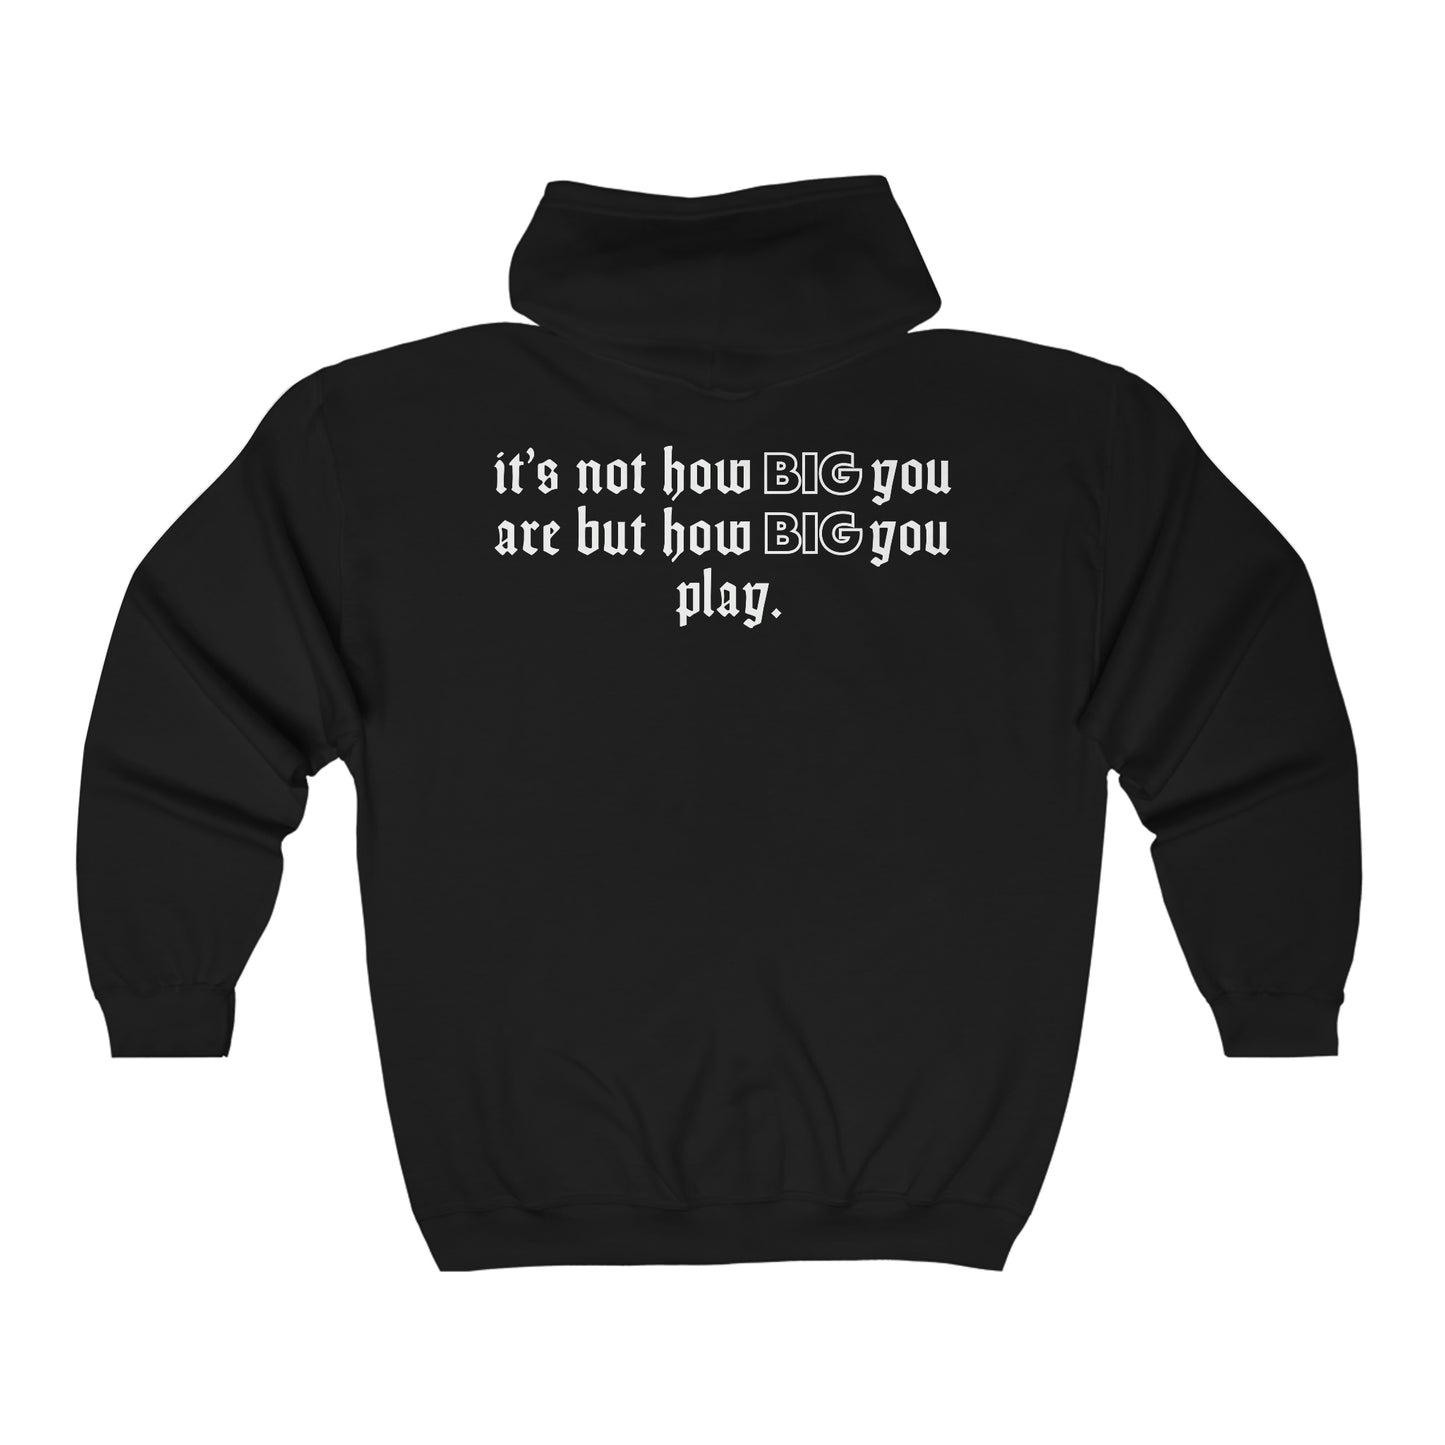 Tanya Windle: It's Not How Big You Are But How Big You Play Zip Up Hoodie